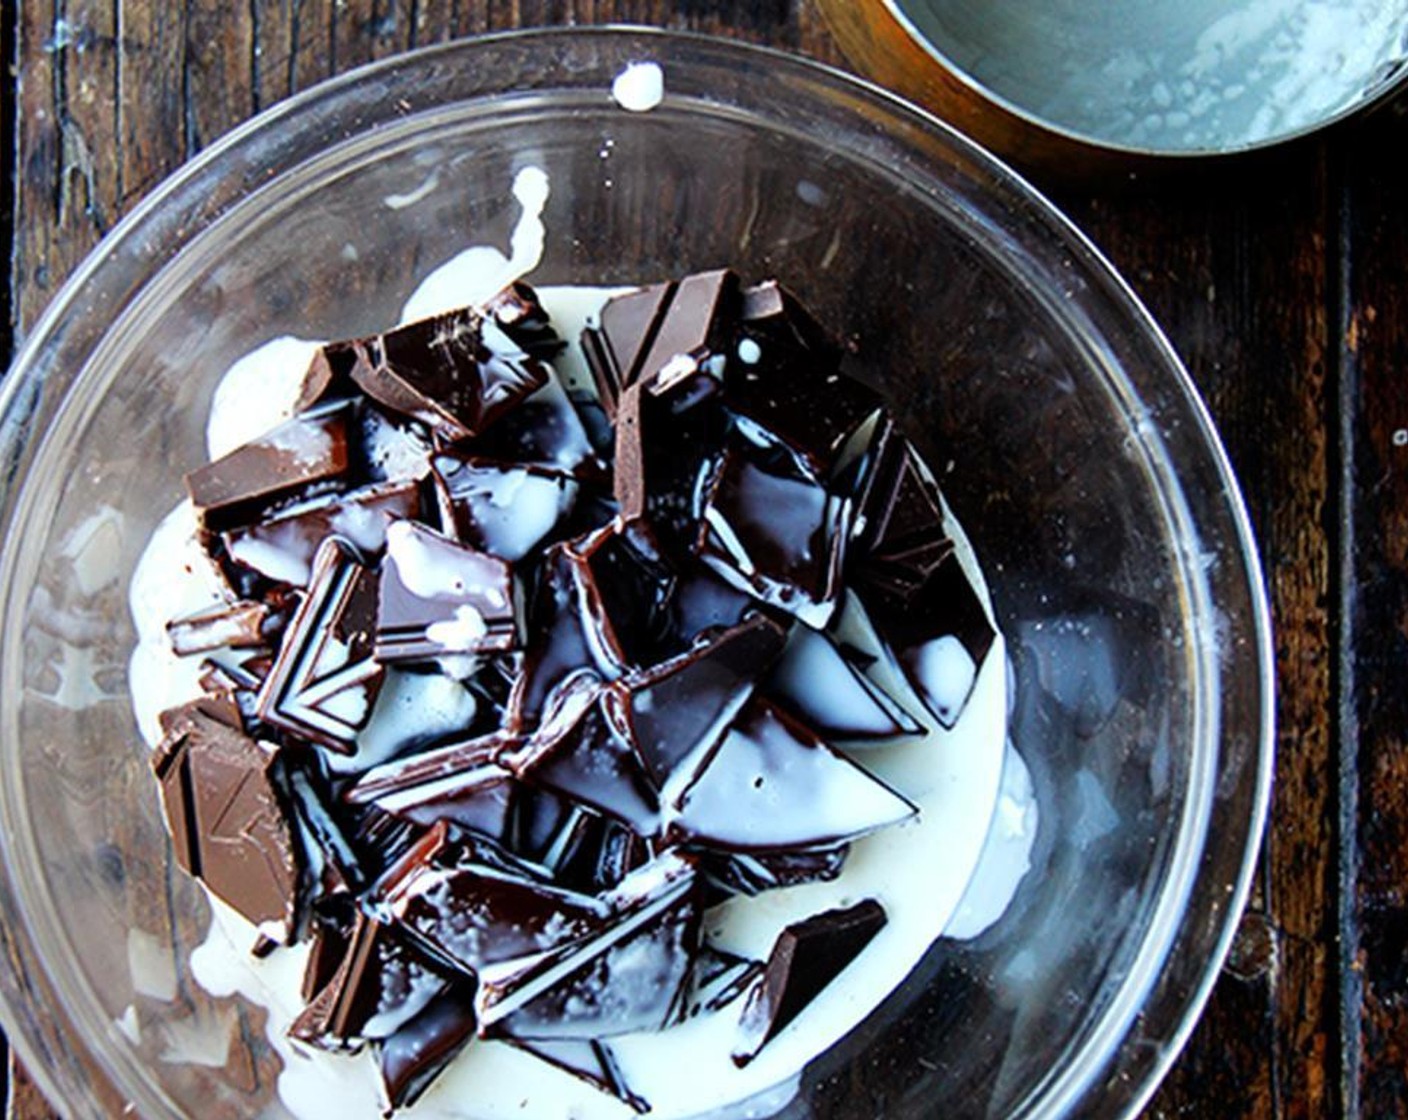 step 2 Bring Heavy Cream (1/2 cup) to a boil, keeping an eye on it constantly. Break Bittersweet Chocolate (2 3/4 cups) into small chunks and place in heat-safe bowl. Pour cream over chocolate, push chocolate chunks down with a spatula so they are submerged, and let sit for a minute.